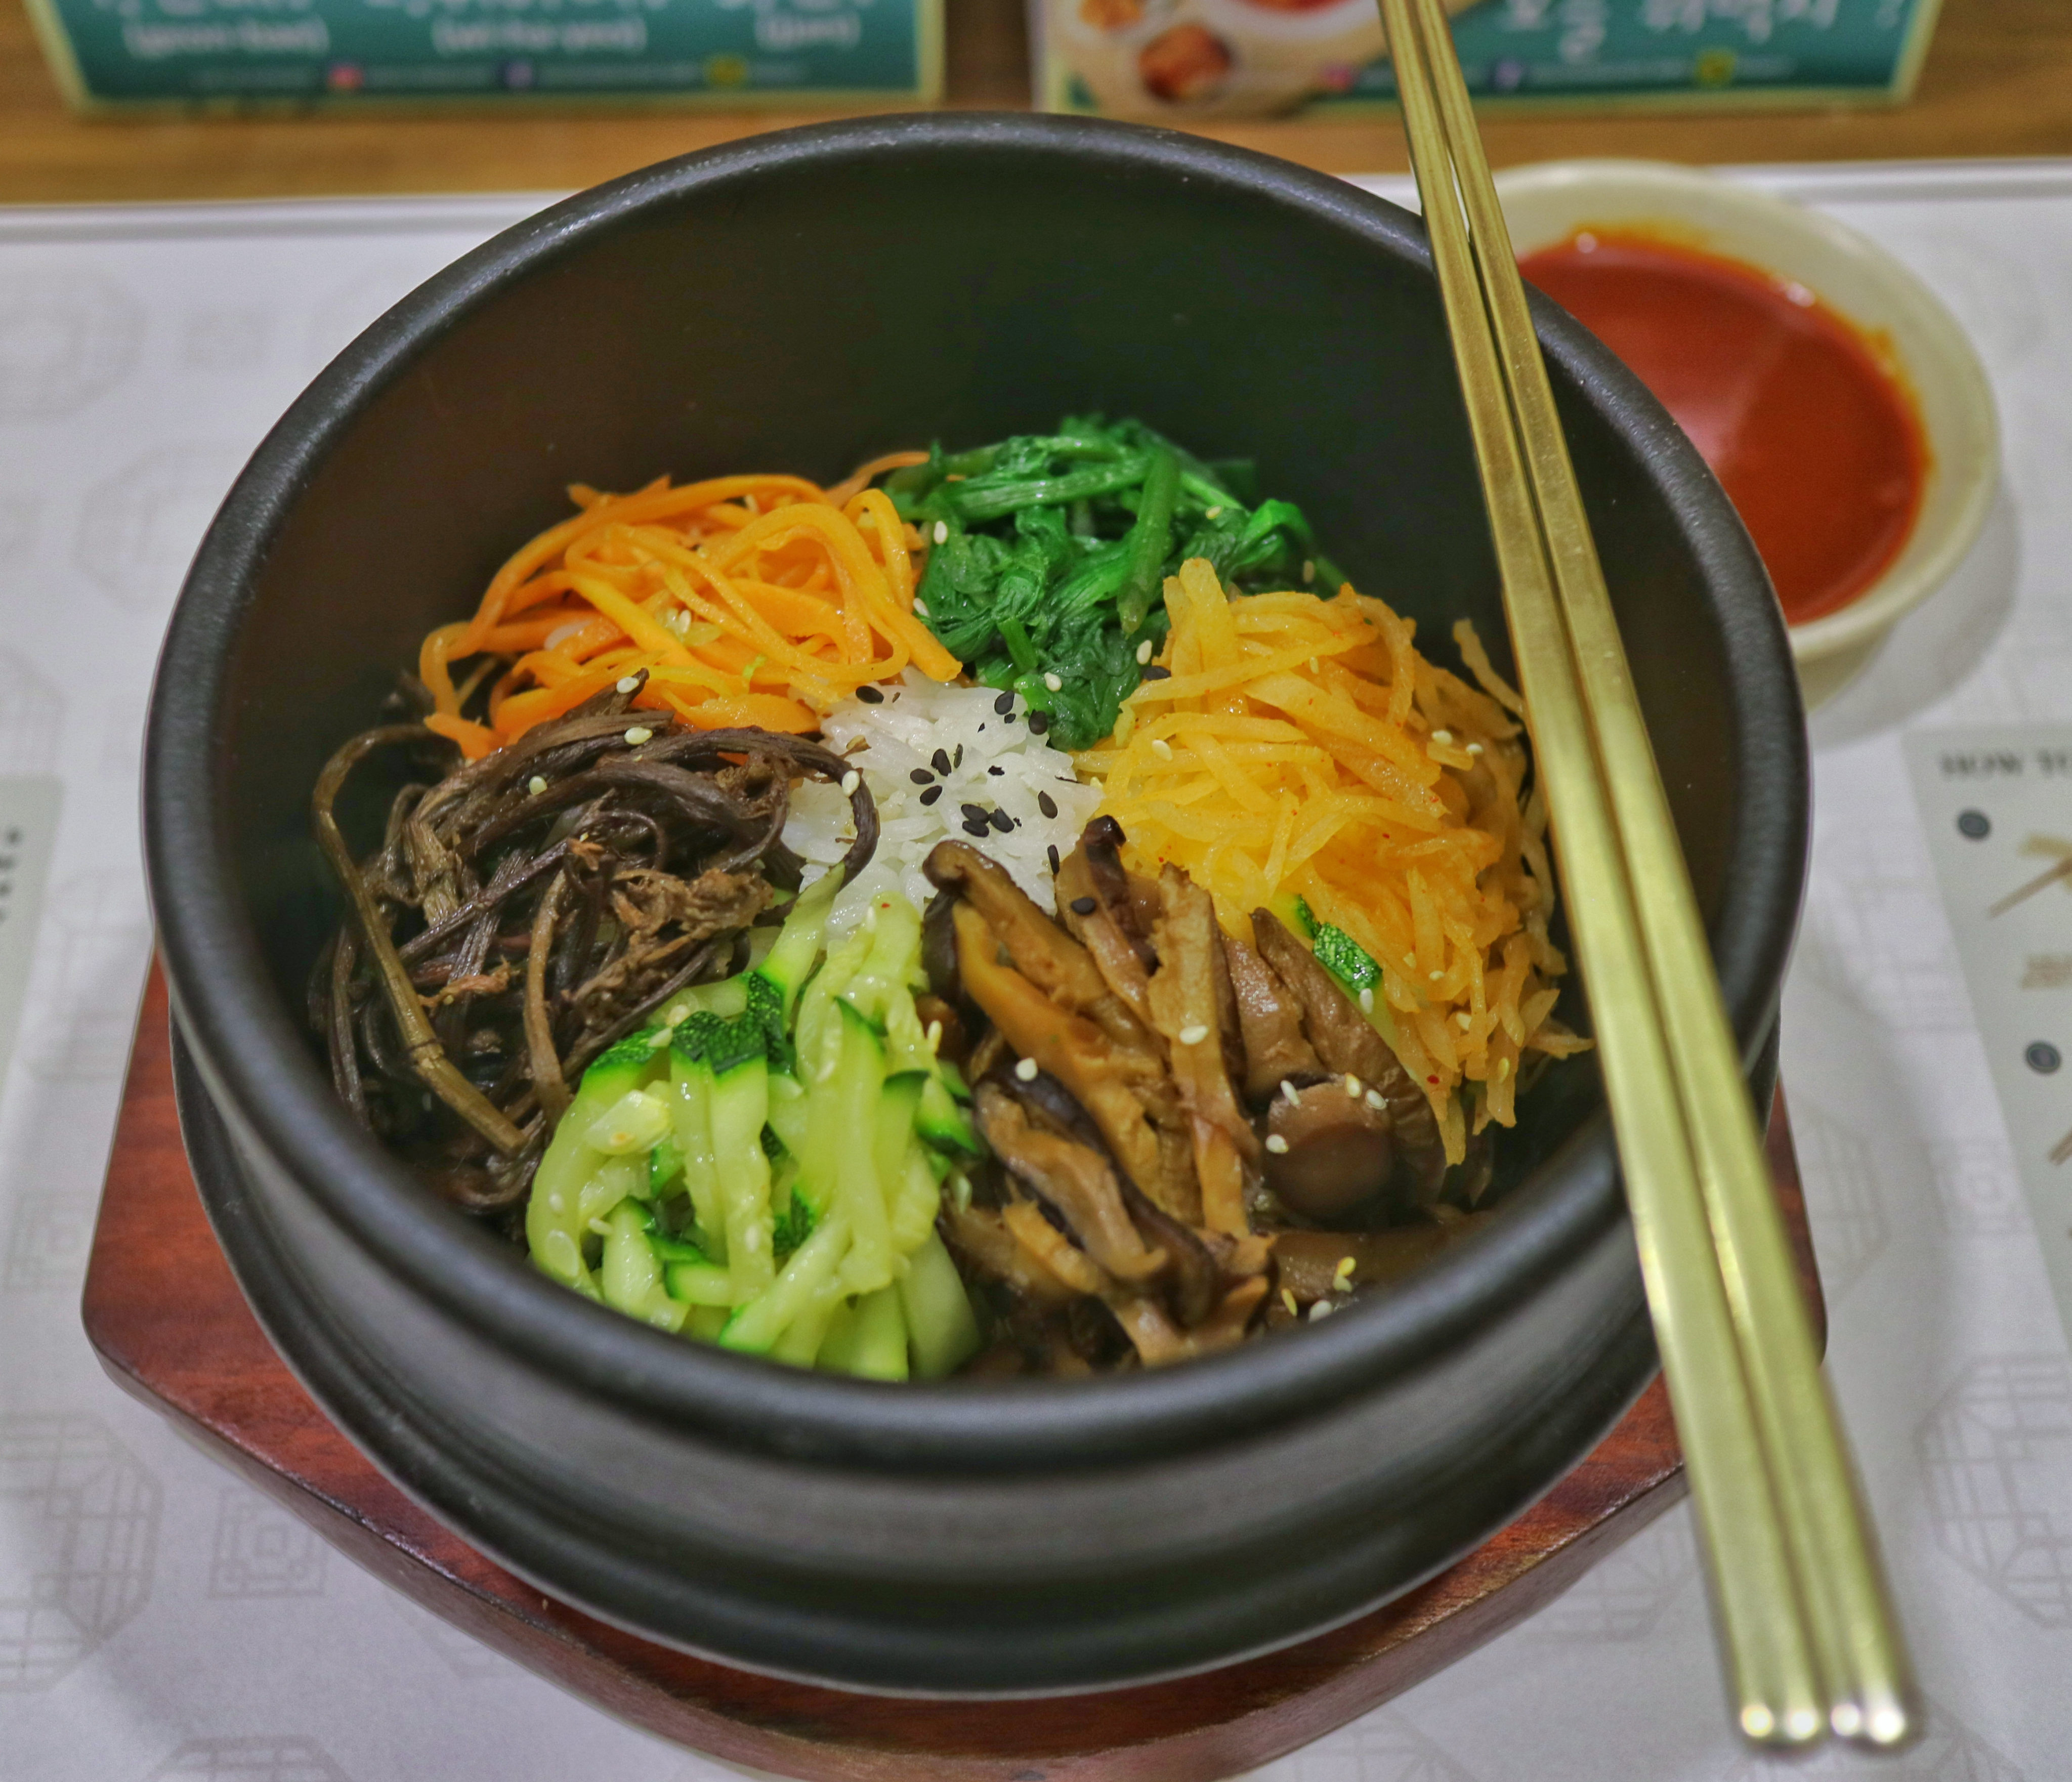 The dish of bibimbap features in K-dramas such as Strong Woman Do Bong Soon and My Lovely Sam Soon.  Korean dramas and K-pop have helped to promote some of the country’s favourite foods in India.